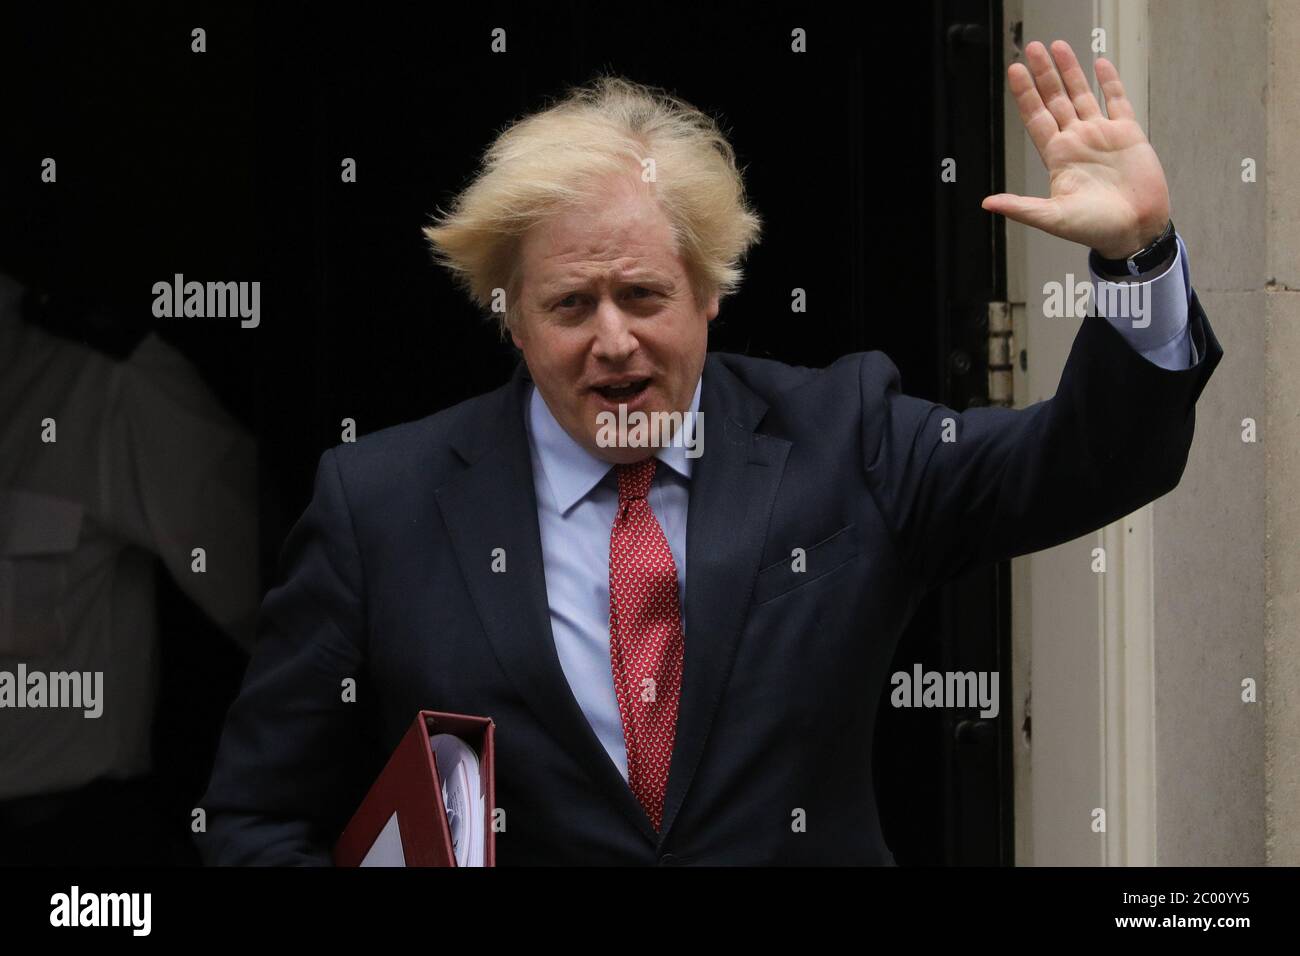 Beijing, China. 10th June, 2020. British Prime Minister Boris Johnson leaves 10 Downing Street for Prime Minister's Questions at the House of Commons in London, Britain on June 10, 2020. British Prime Minister Boris Johnson confirmed Wednesday that zoos and outdoor attractions in England will be allowed to reopen from Monday, but still social distancing rules must be followed. Credit: Tim Ireland/Xinhua/Alamy Live News Stock Photo